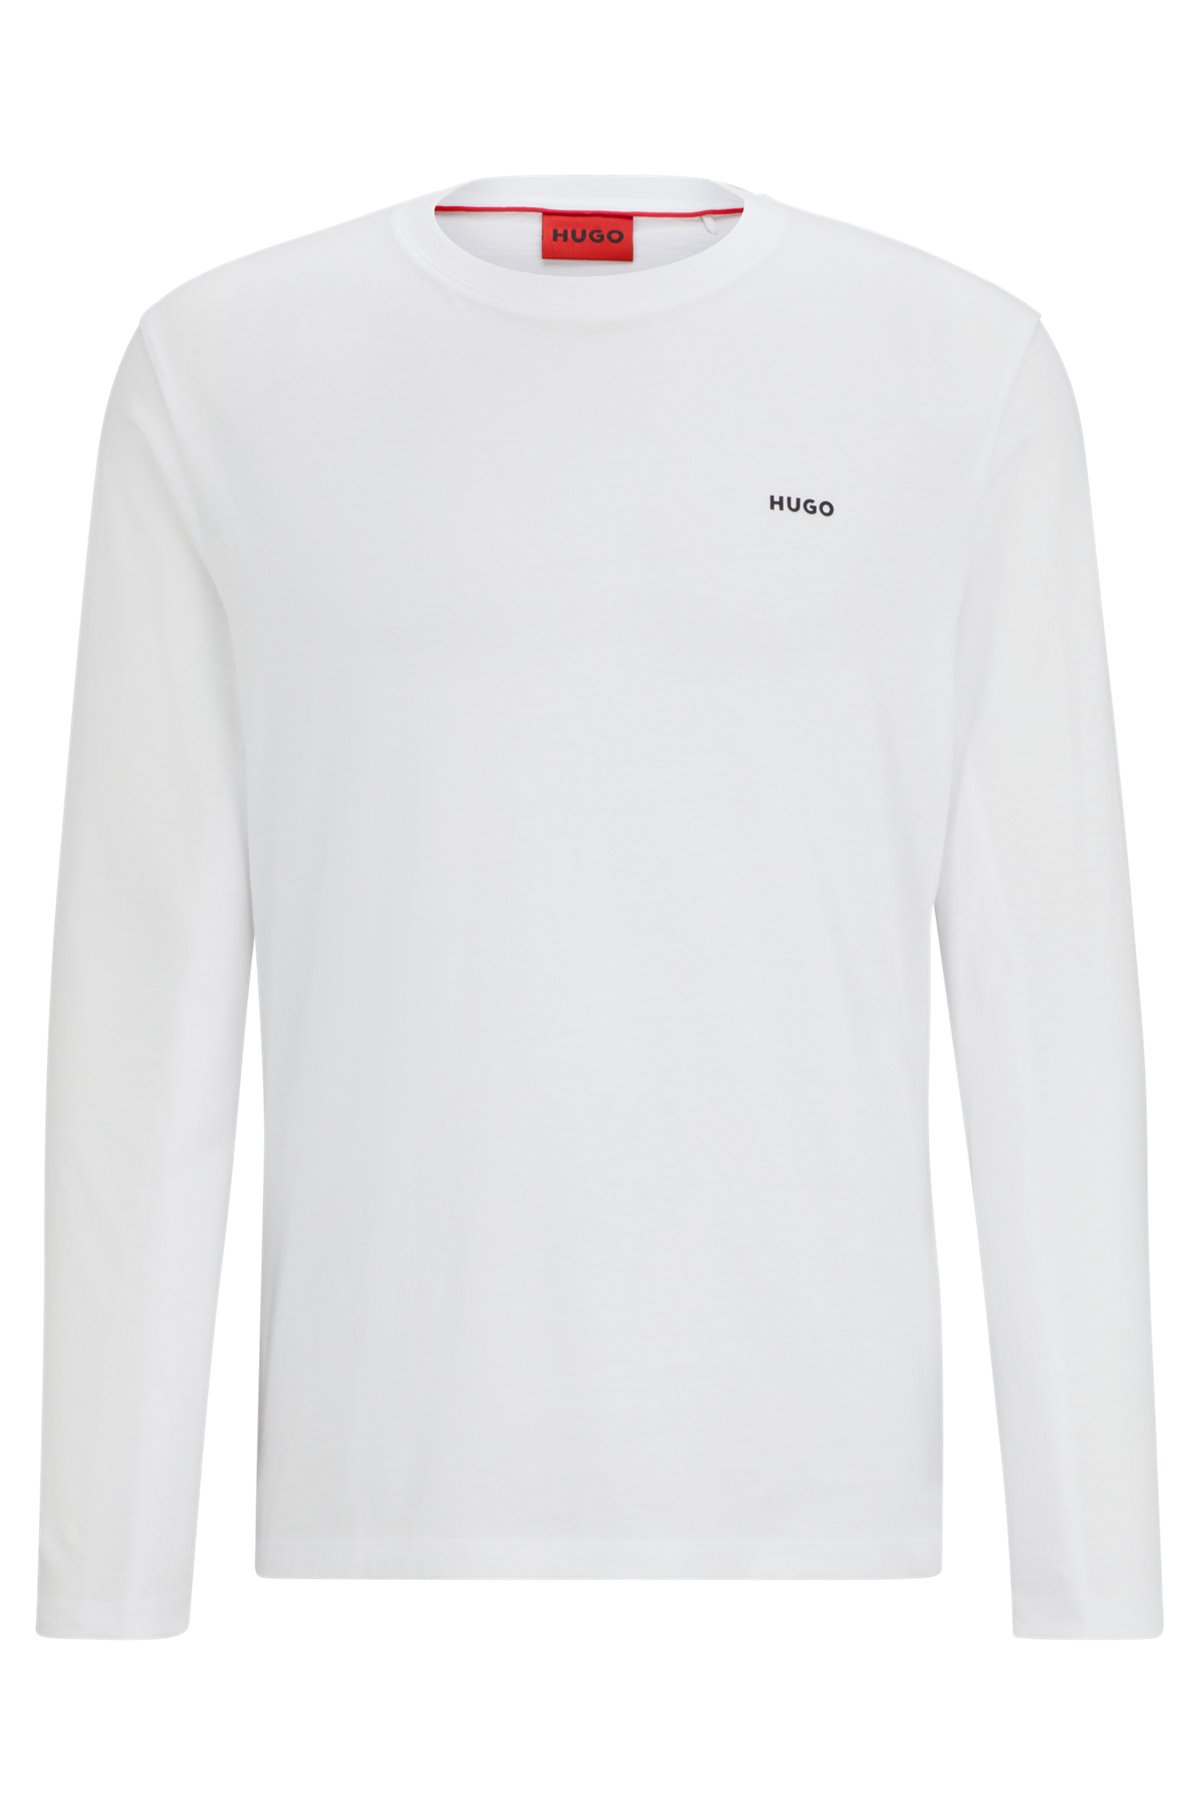 HUGO - Long-sleeved T-shirt in cotton jersey with logo print